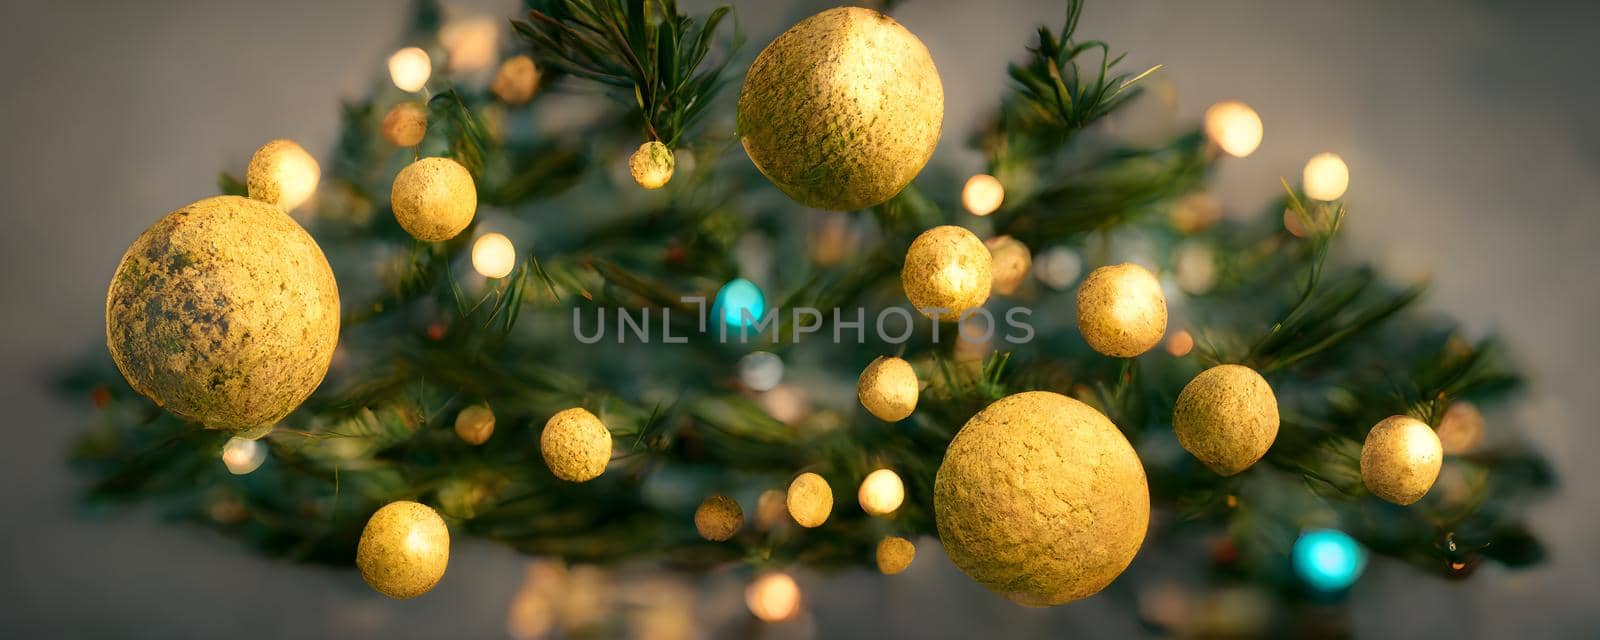 fir twigs with golden christmas balls on gray background, neural network generated art. Digitally generated image. Not based on any actual scene or pattern.